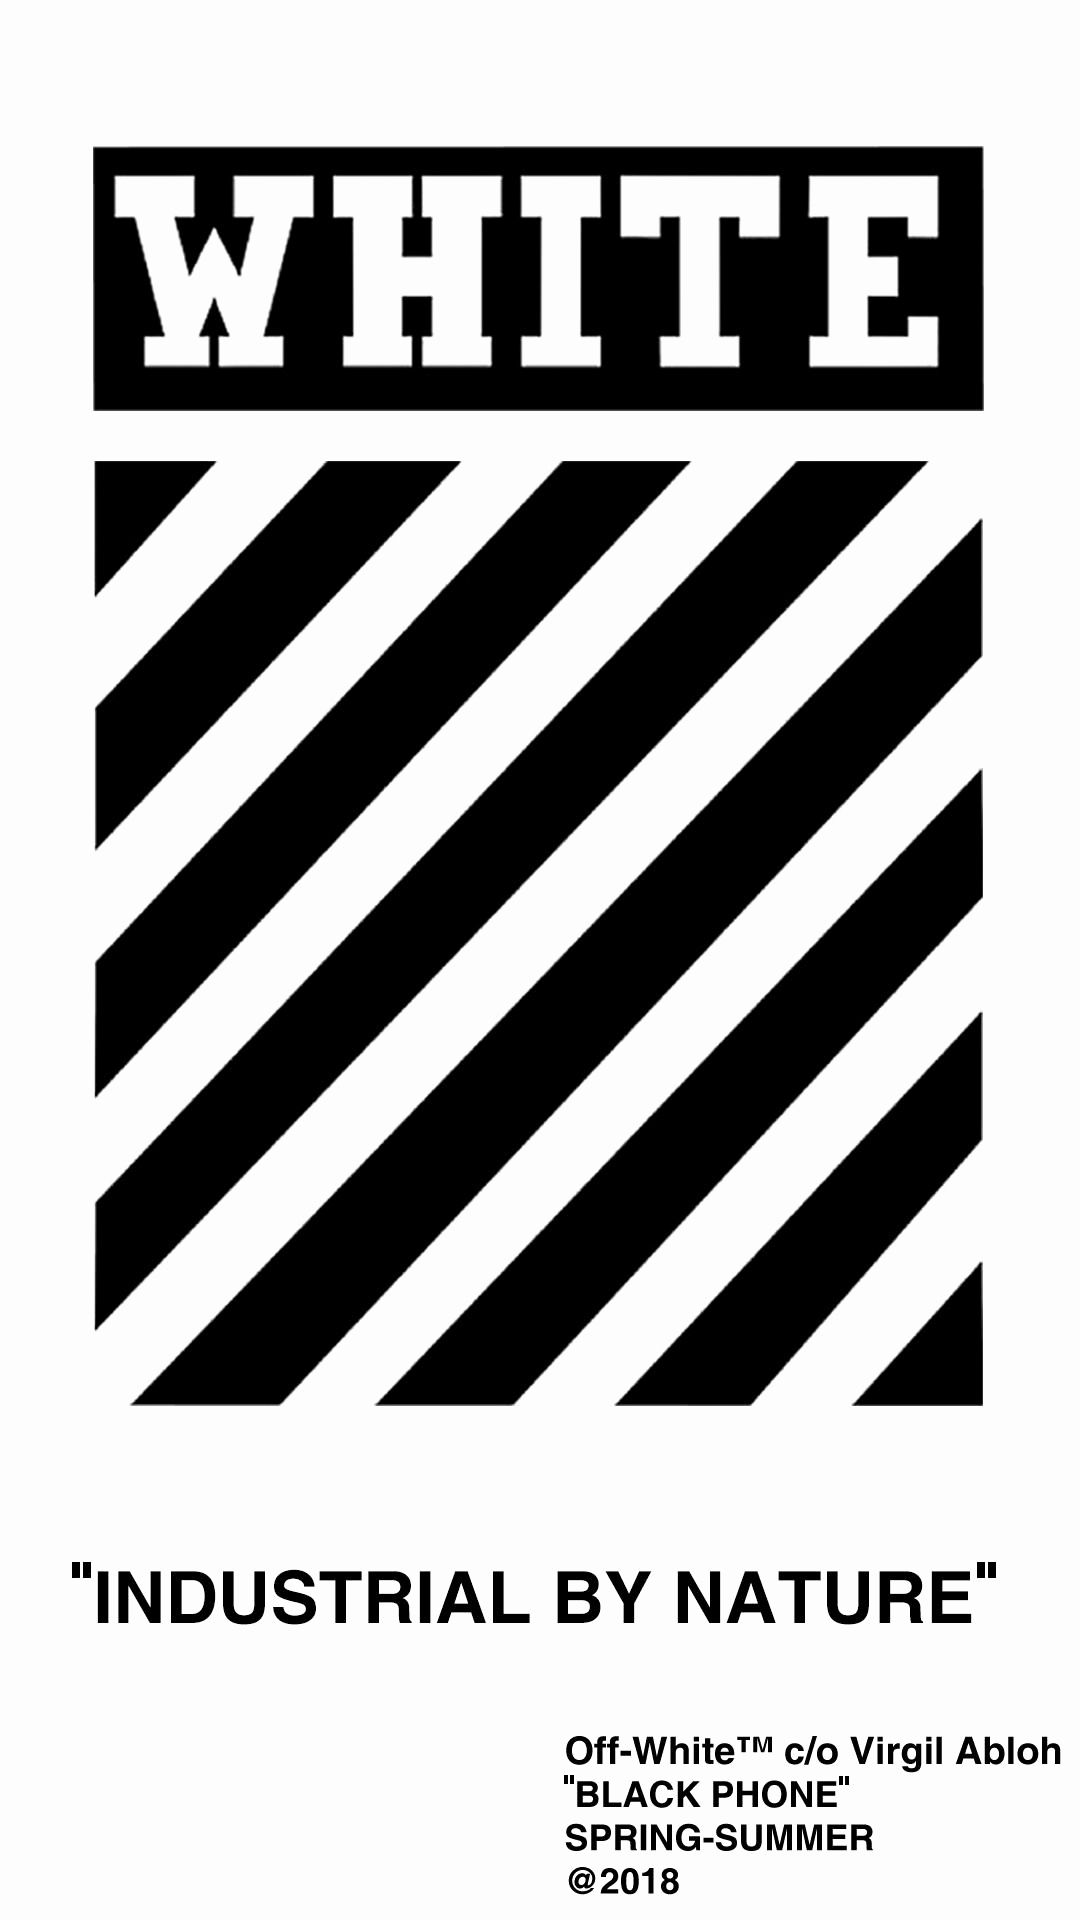 Off White Logo Wallpaper Luxury F White 4k HD Desktop Wallpaper for 4k Ultra HD Tv • Wide & Ultra Widescreen Displays • Tablet for You of The Hudson